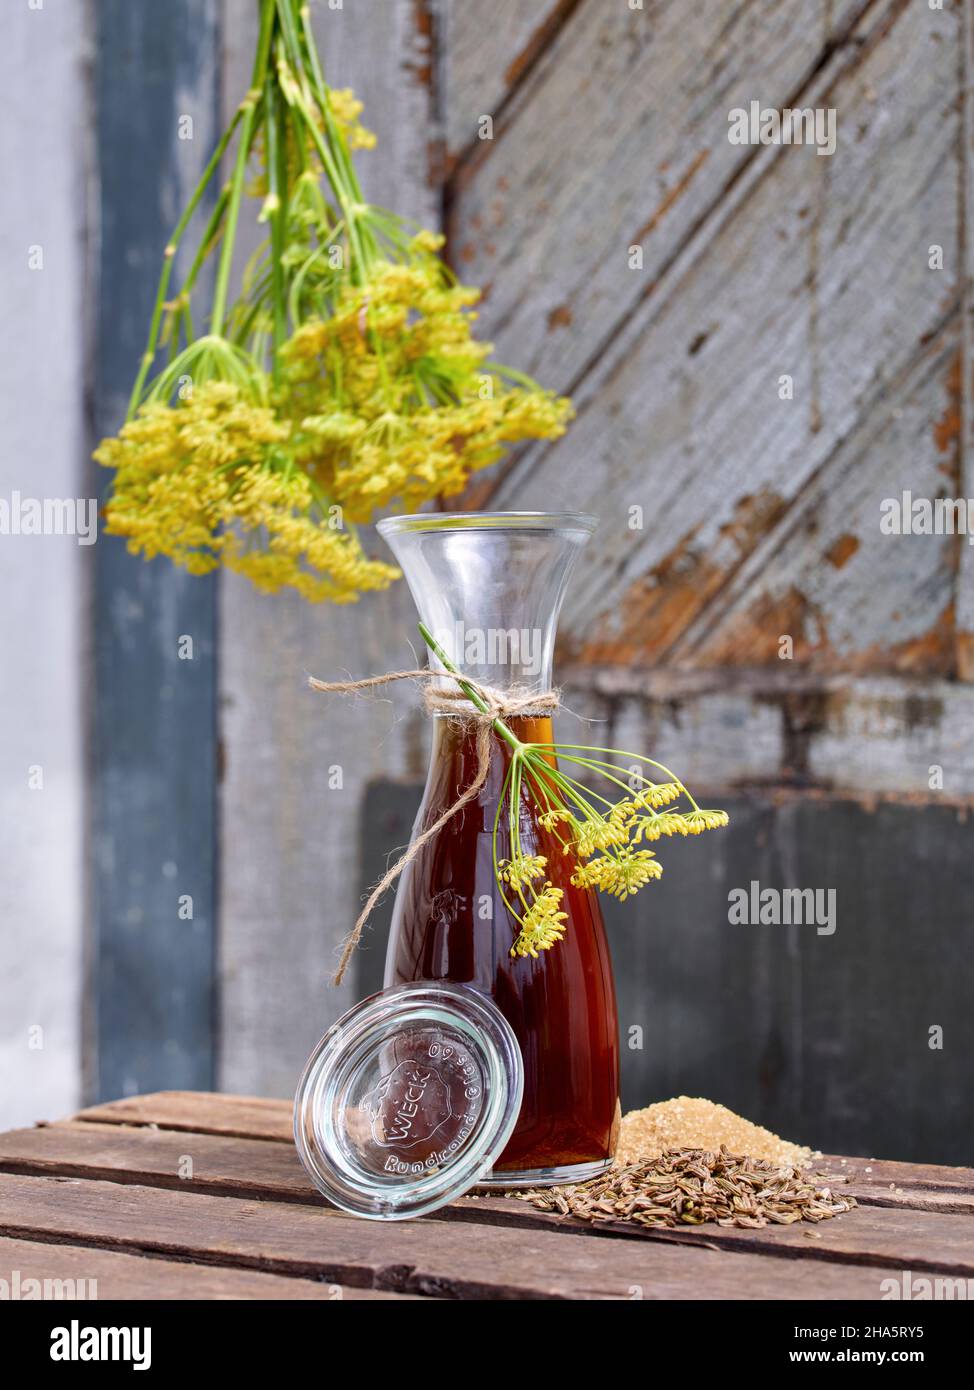 work steps with fennel and fennel seeds for the preparation of fennel syrup,wake-up bottle with fennel syrup on a wooden table in front of an old wooden door on which the tied branches of fennel hang Stock Photo